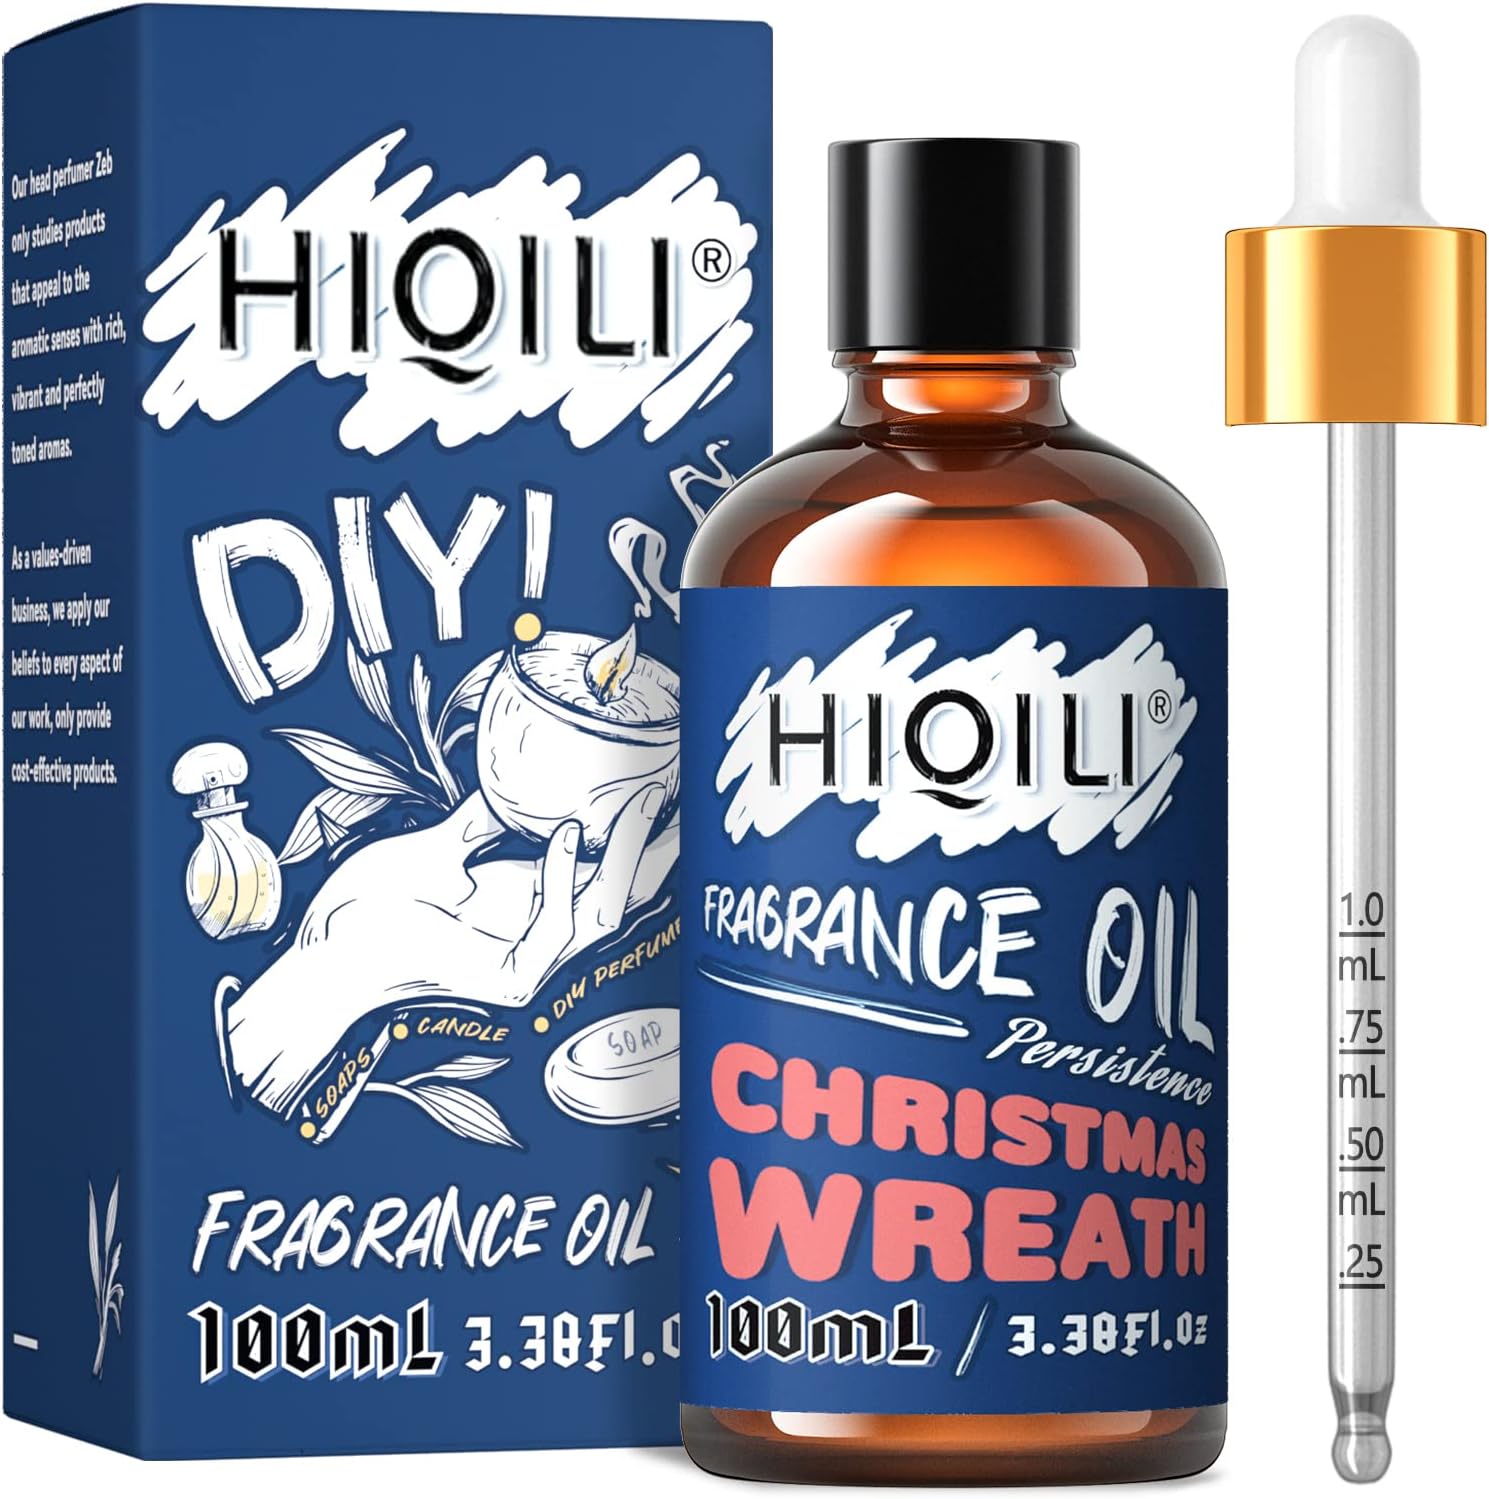 HIQILI Christamas Wreath Essential Oil - Pure Fragrance Oil for Diffuser, Body, Candle Soap Perfume Lotion Making, 3.38 Fl Oz Halloween Thanksgiving Gift